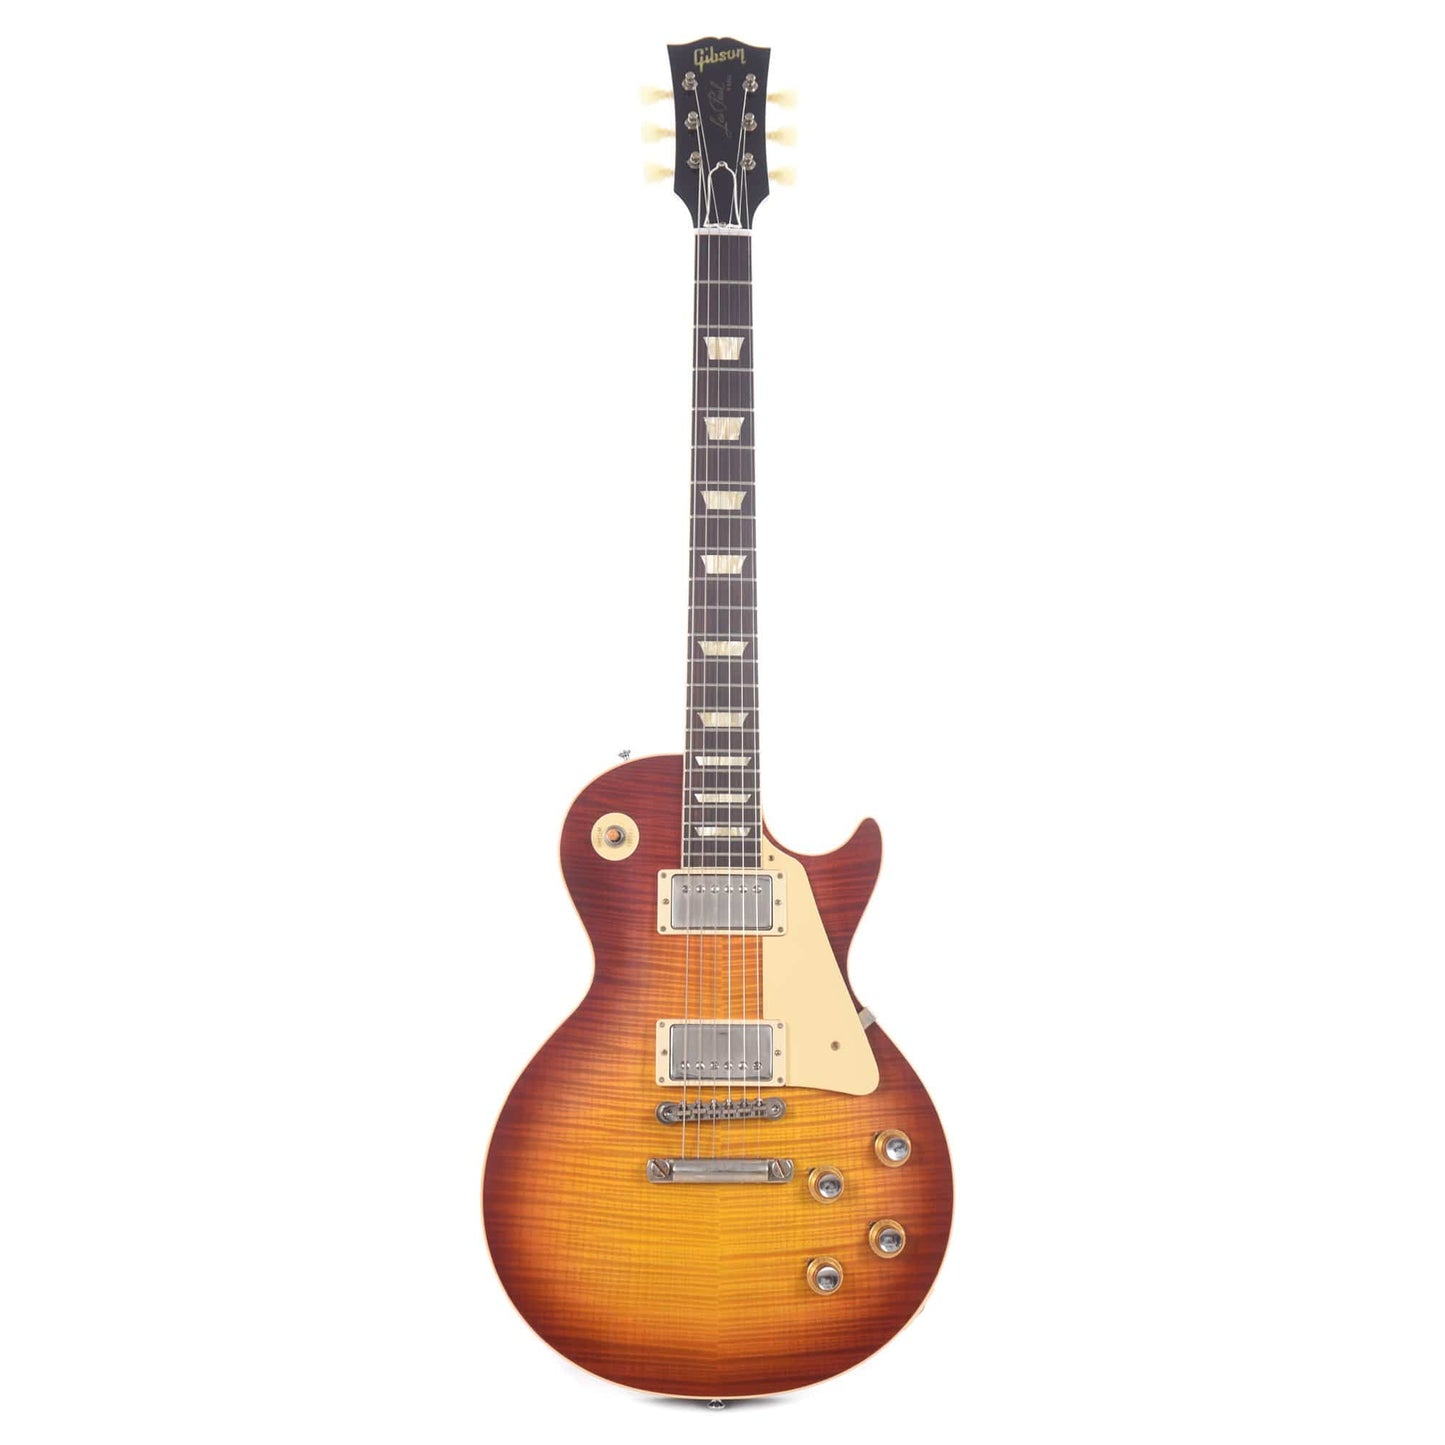 Gibson Custom Shop 60th Anniversary 1960 Les Paul Standard "CME Spec" Tomato Soup Burst VOS w/60 V3 Neck Electric Guitars / Solid Body